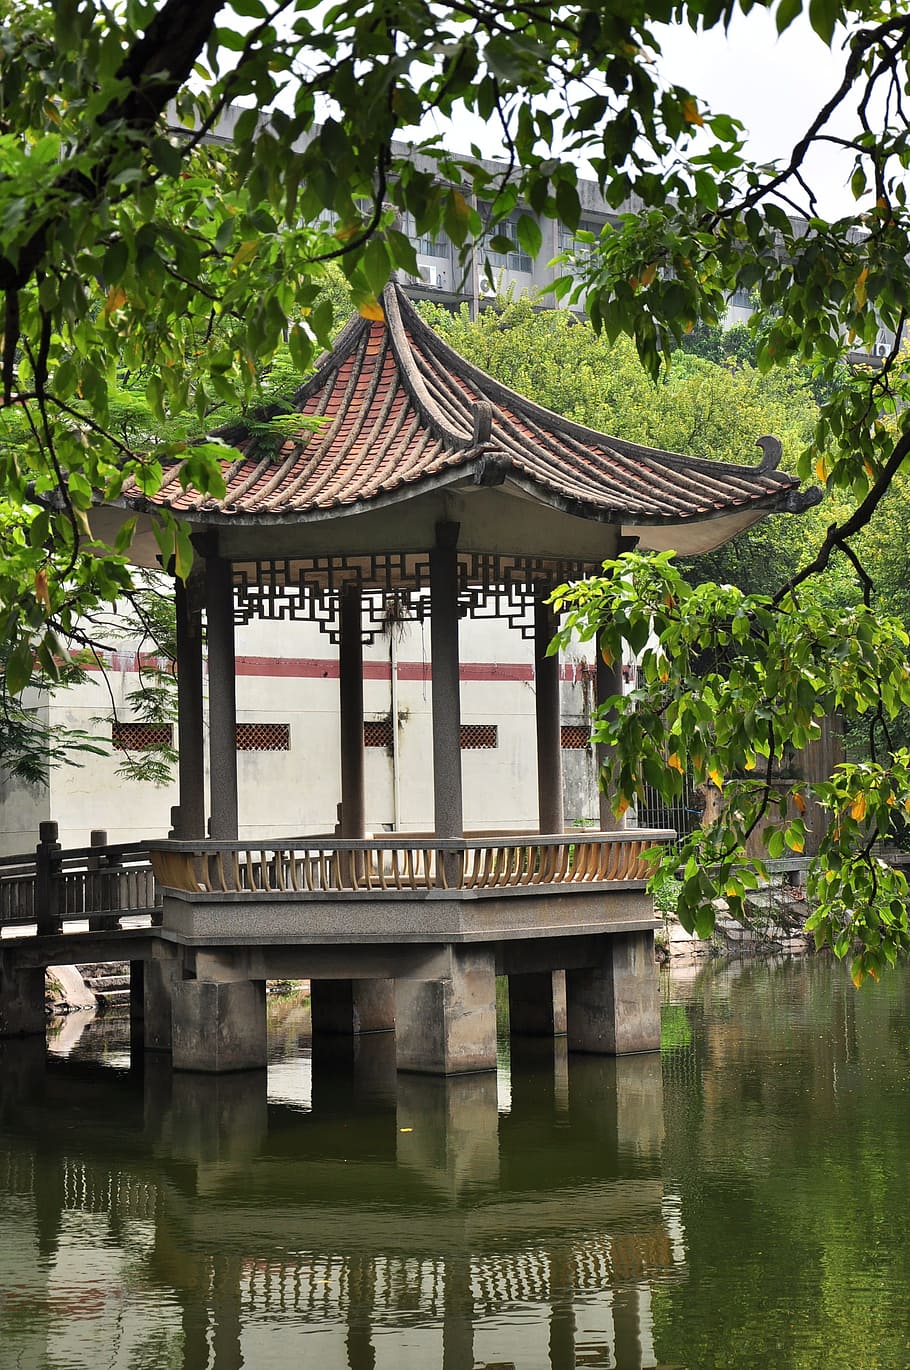 chinese kiosk, Chinese Pavilion, Kiosk, chinese gazebo, water, architecture, travel destinations, built structure, day, reflection